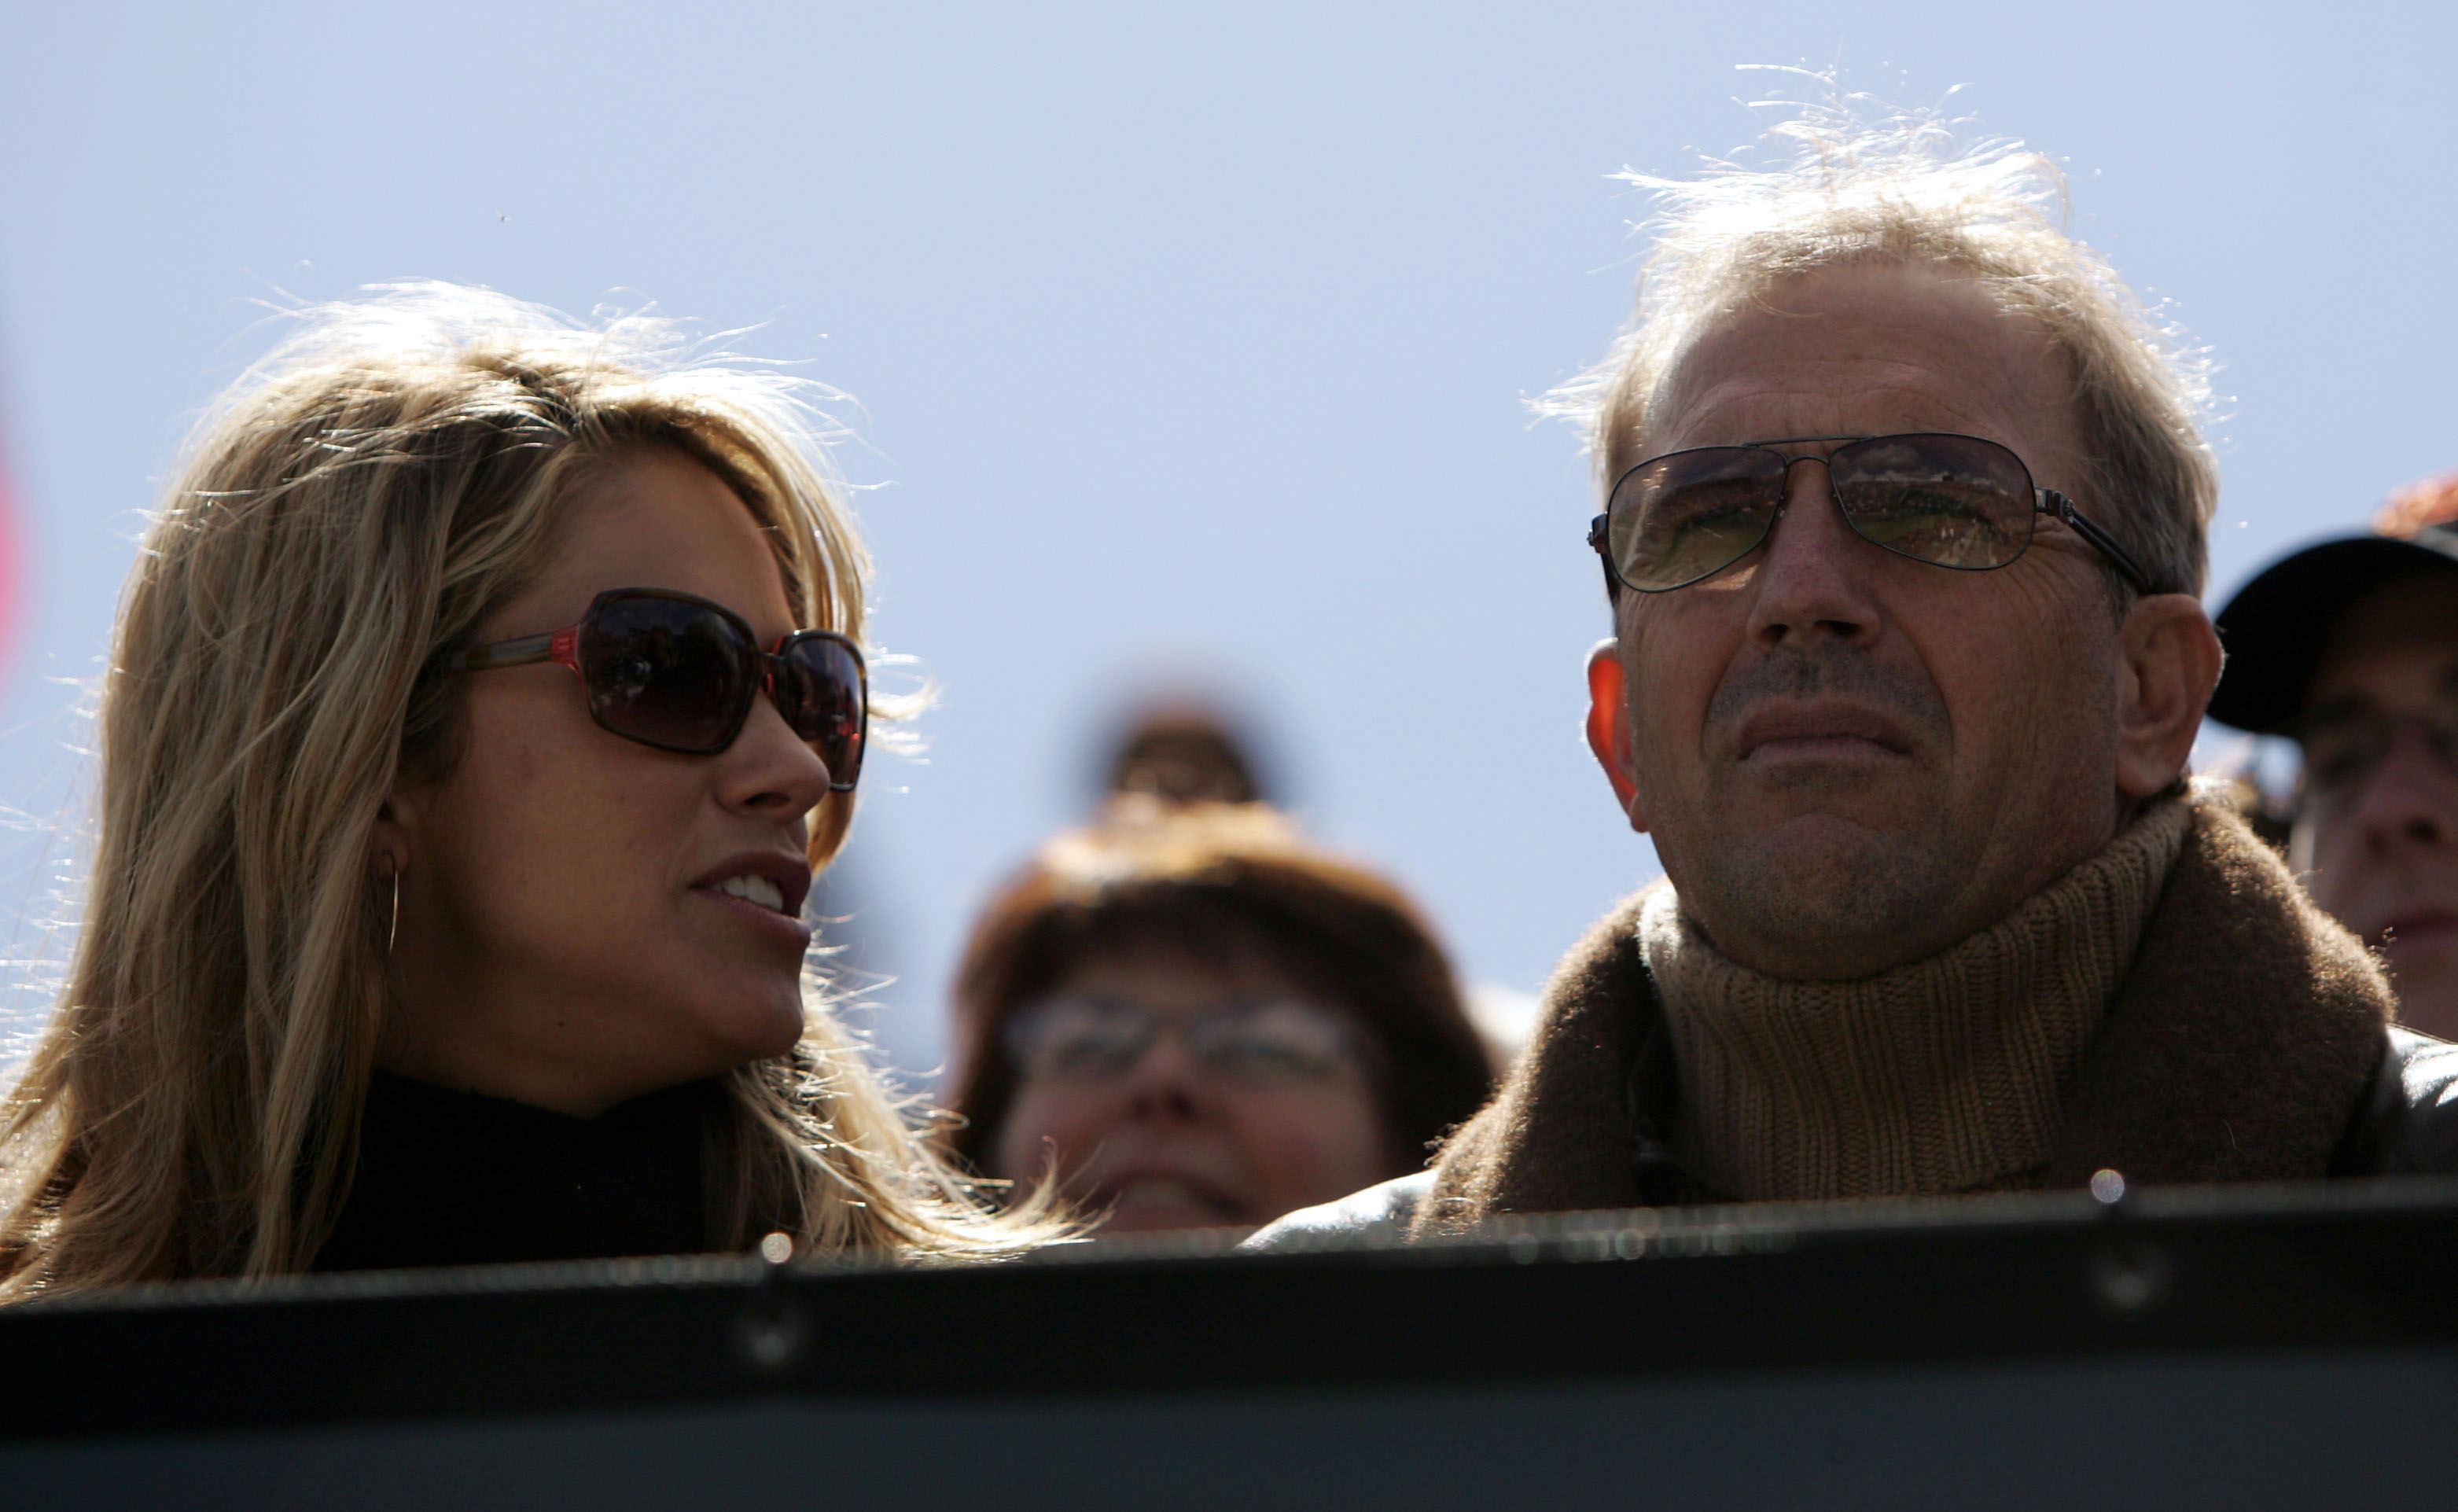 Kevin Costner and his wife, Christine at the Davis Cup World Group first round match between Andre Agassi of the USA and Ivan Ljubicic of Croatia in 2005 | Source: Getty Images